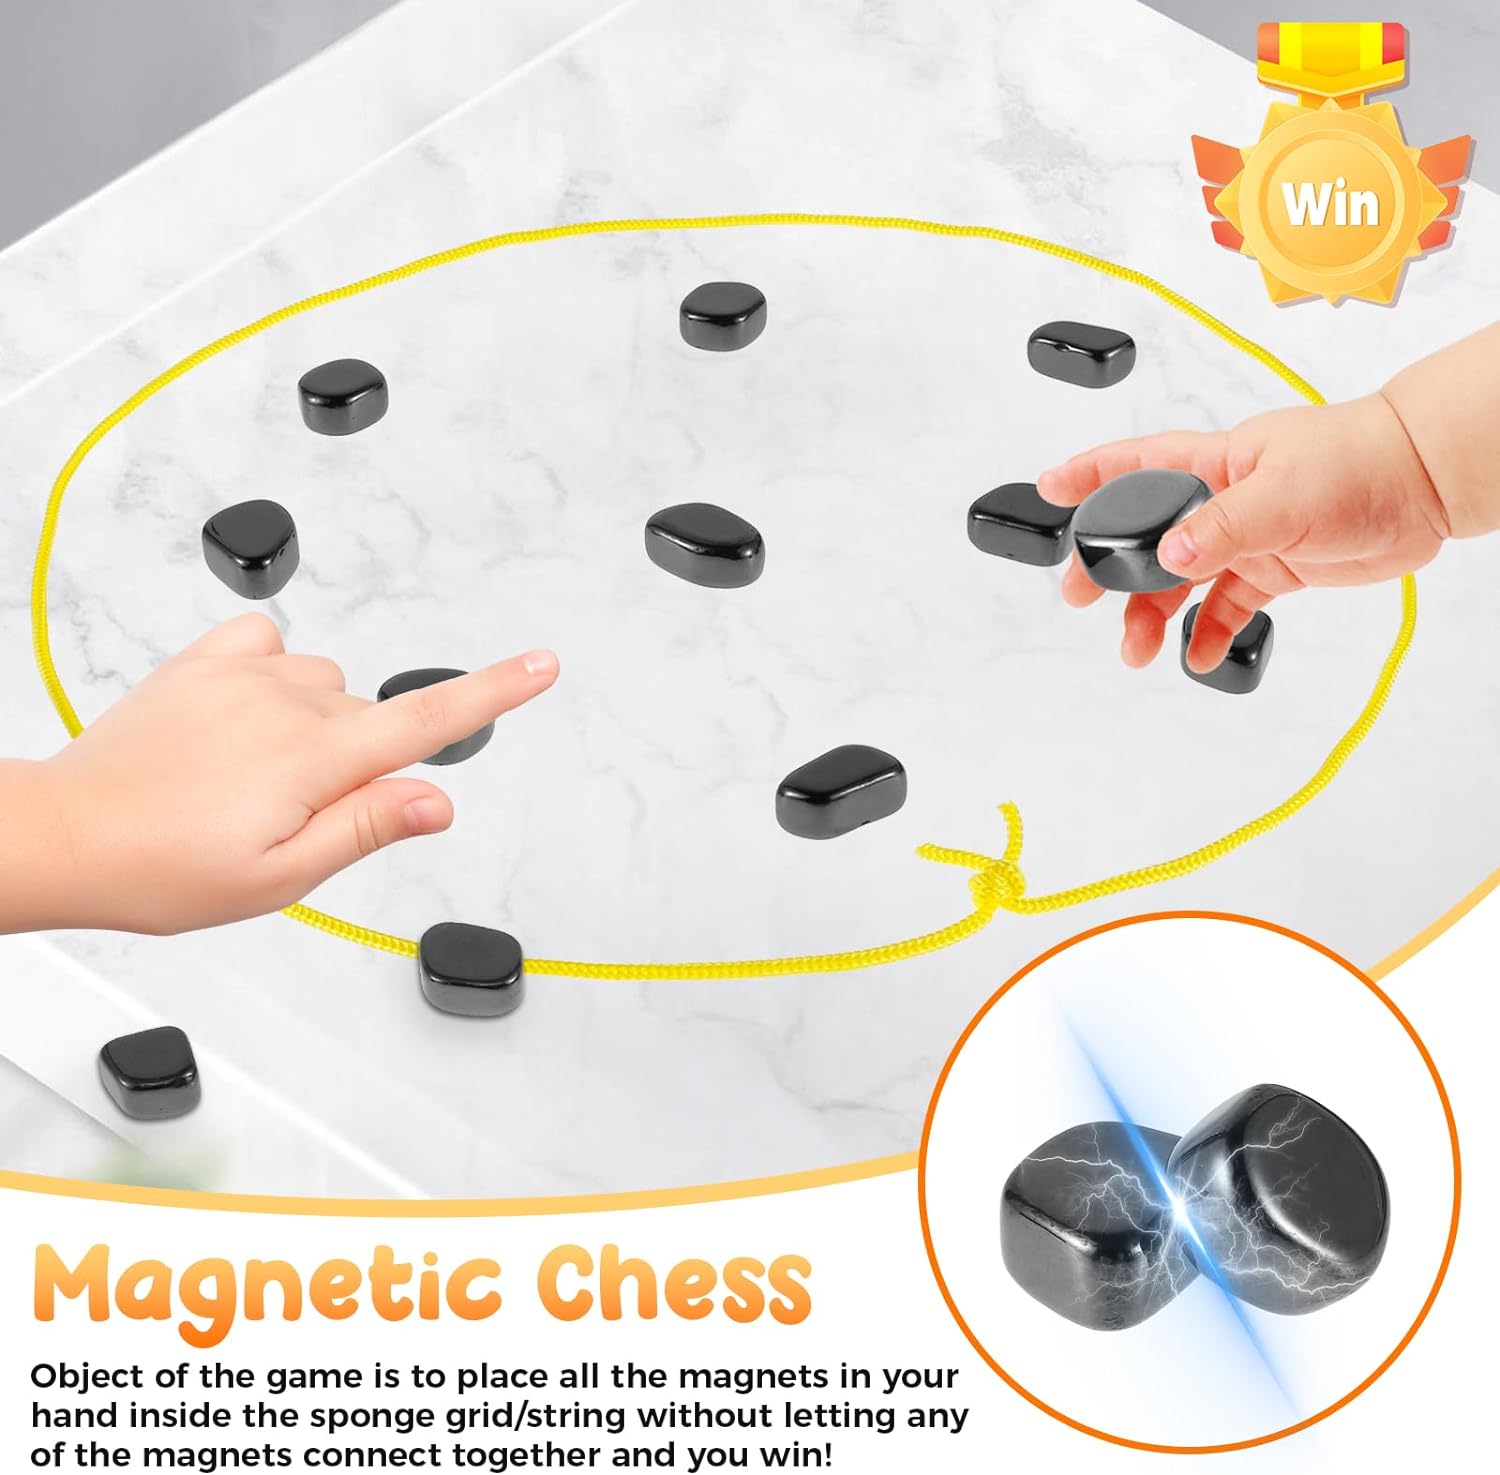 18pcs Magnetic Chess Game, Fun Table Top Magnet Game with String